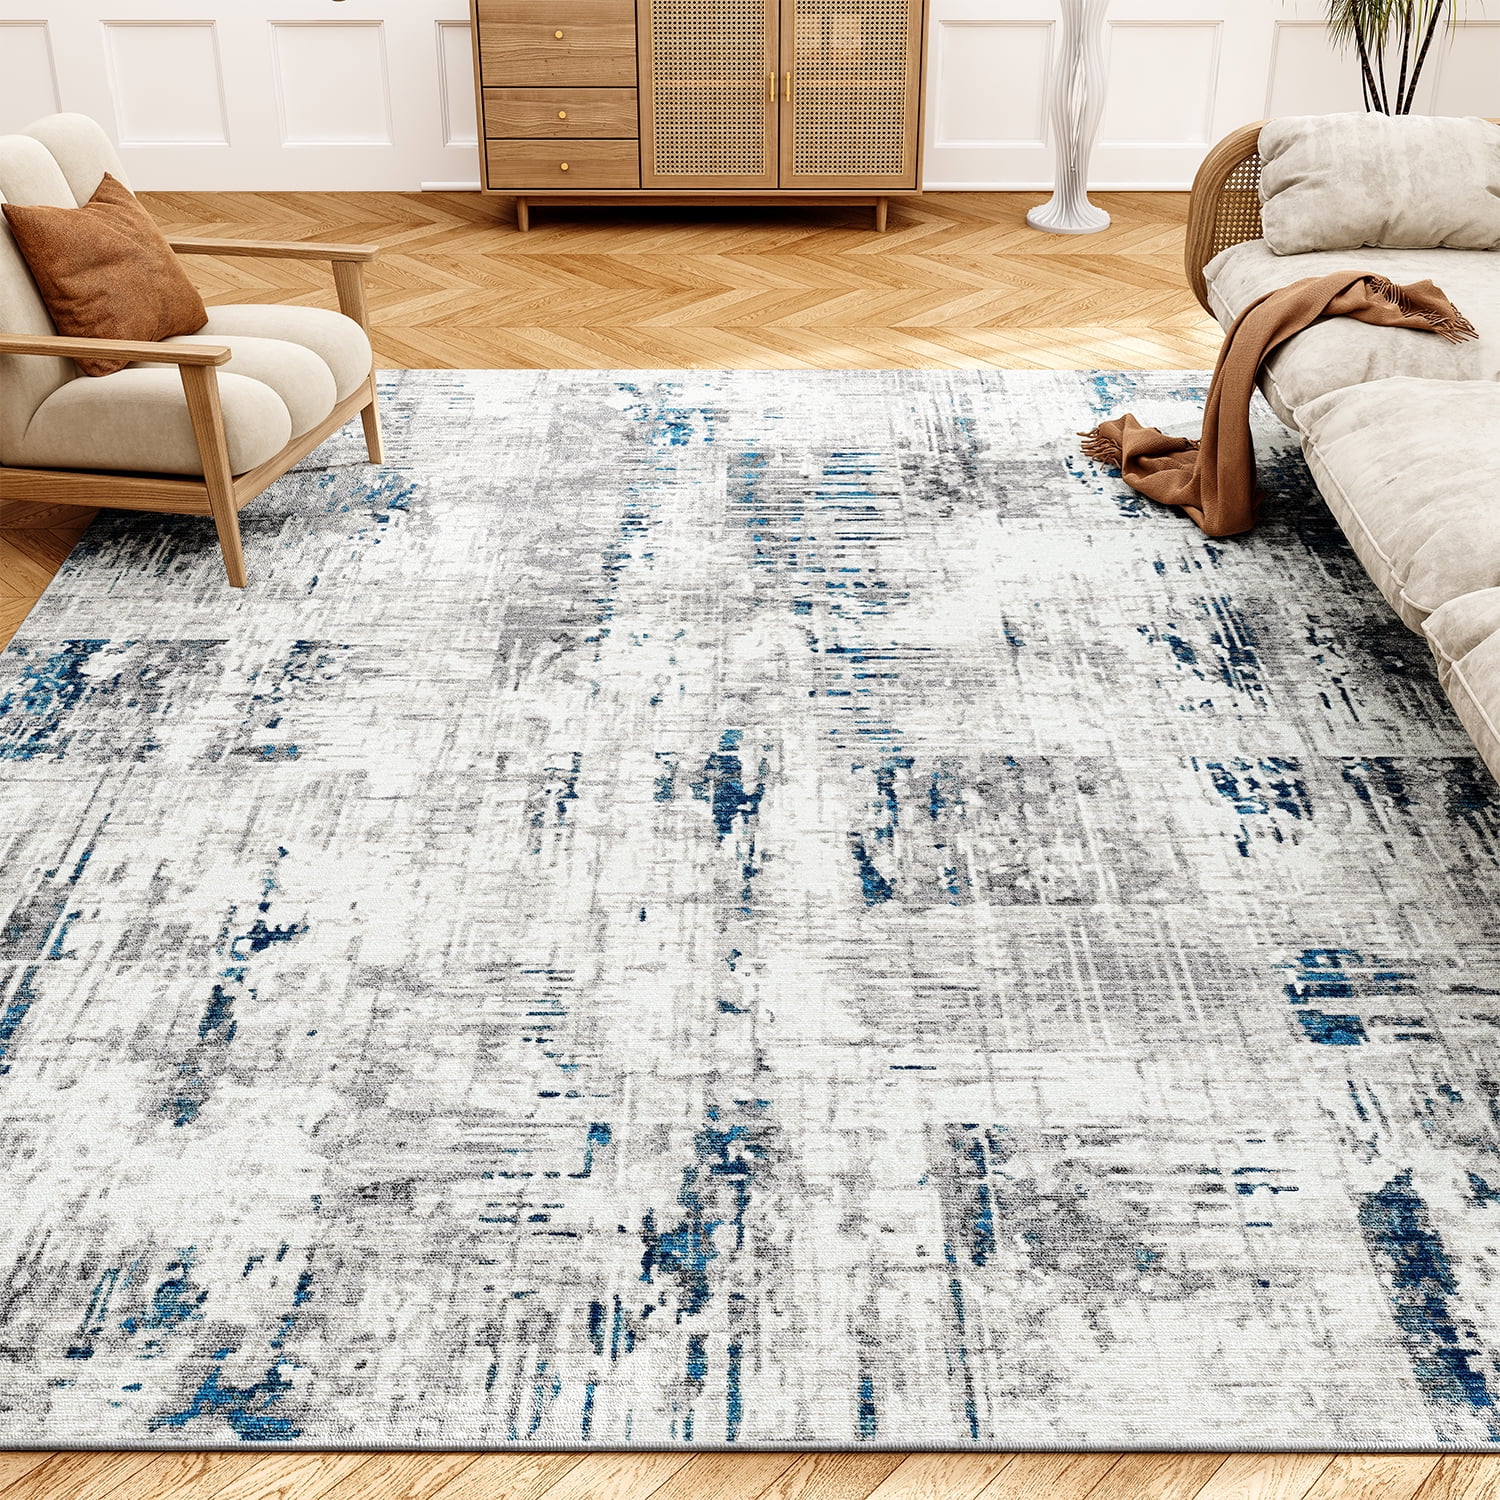 SIXHOME Area Rugs for Living Room 8'x10' Washable Rugs Boho Large Area Rug  Modern Geometric Neutral Carpet and Area Rugs for Home Decor Foldable